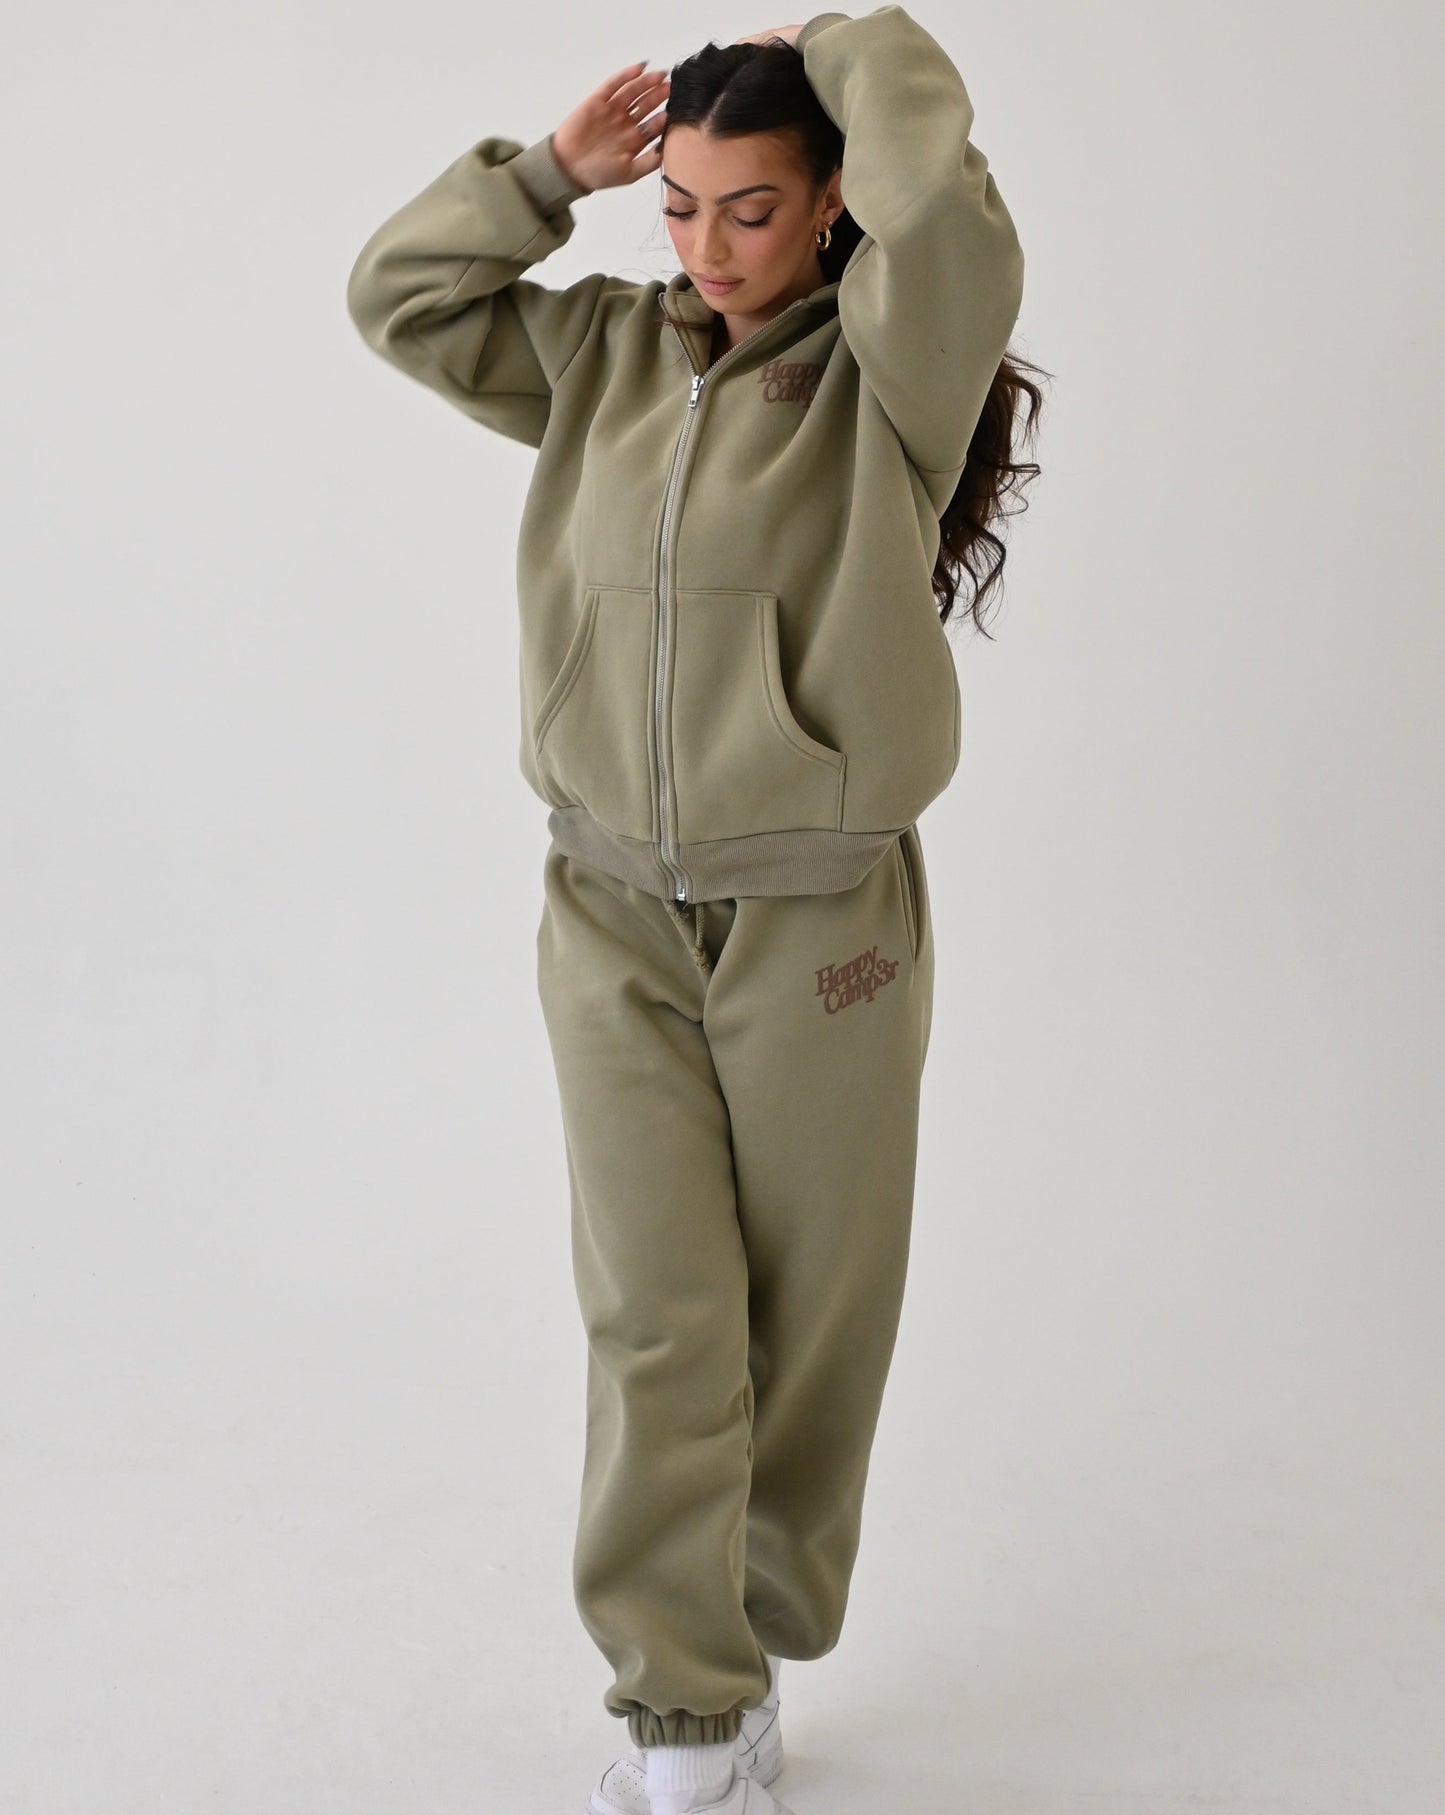 Disrupt Anxiety with Gratitude Sweatpants - Dusty Olive